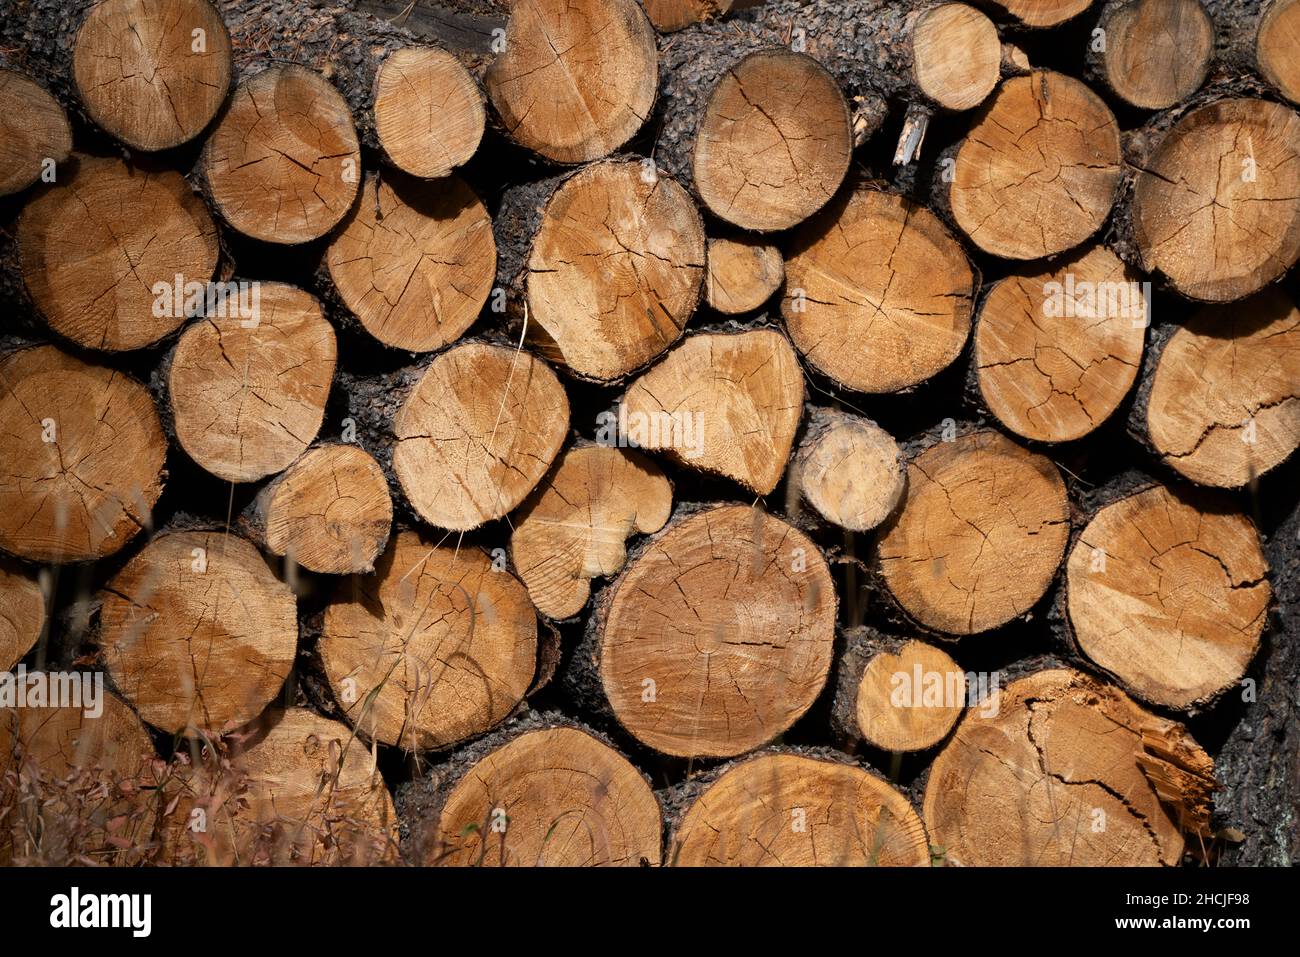 Neatly stacked Firewood In the Prairies of Canada Stock Photo